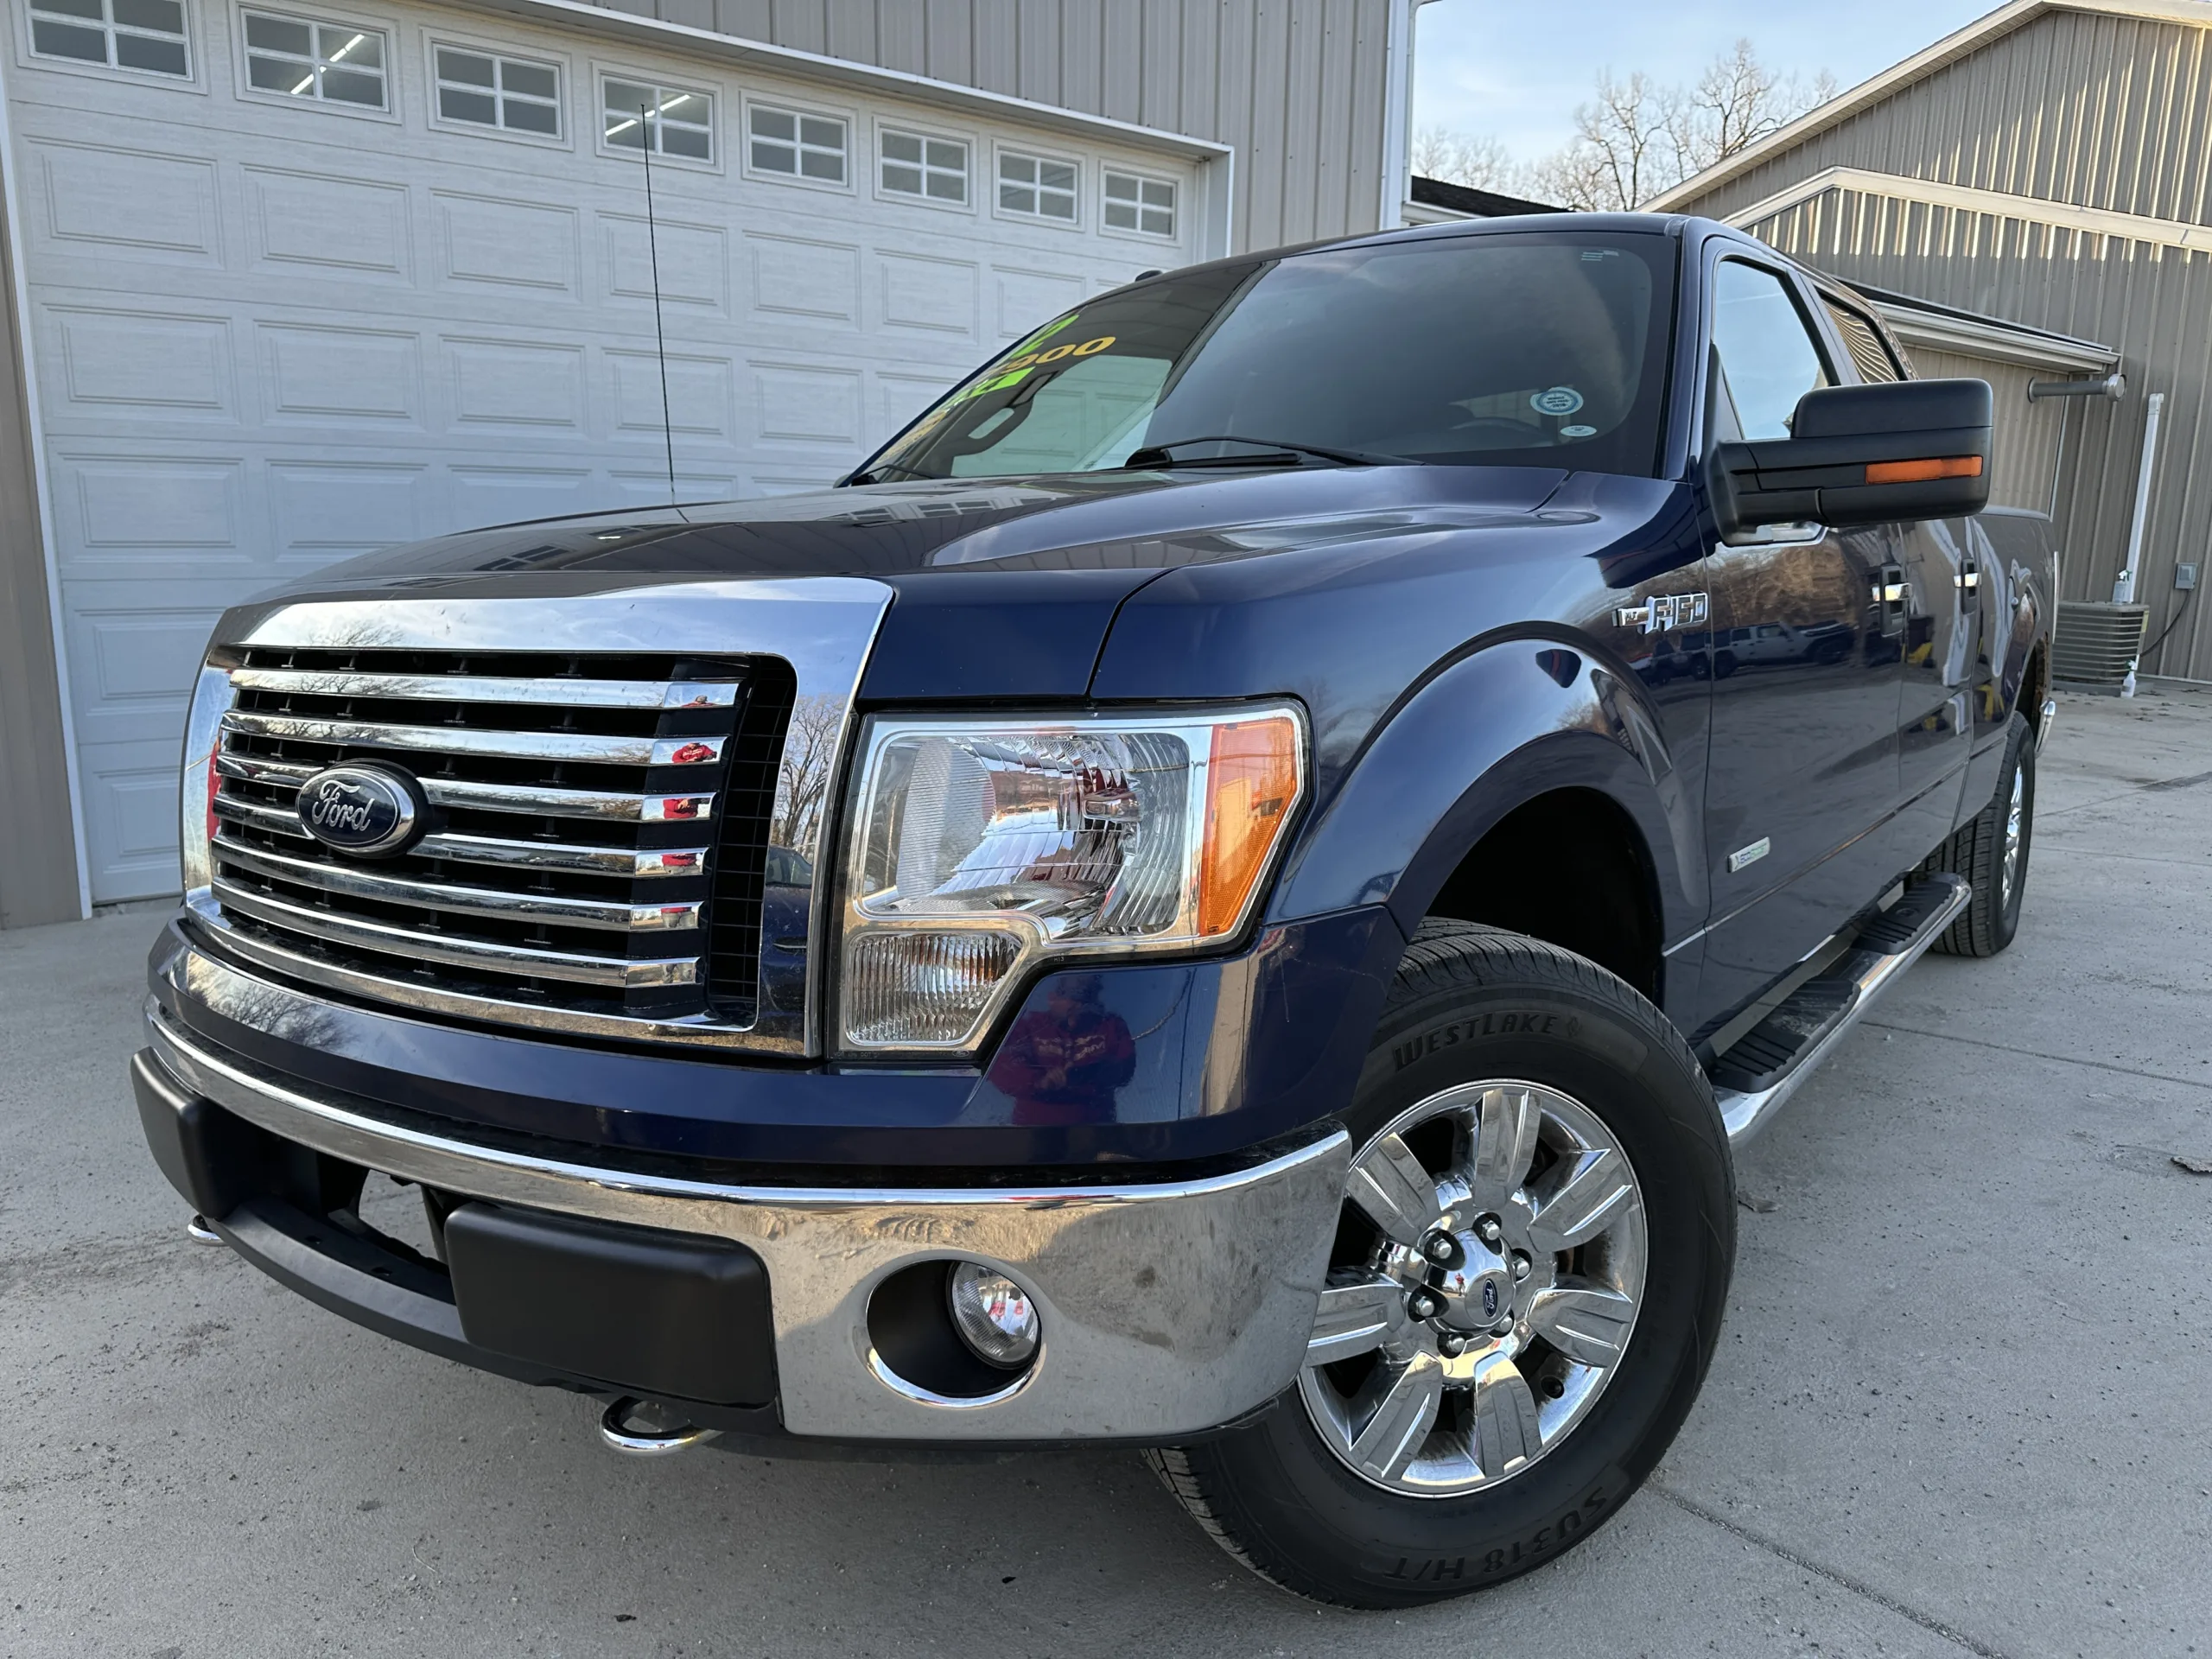 2012 Ford F-150 For Sale XLT 4WD Super Crew Cab Eco Boost V6